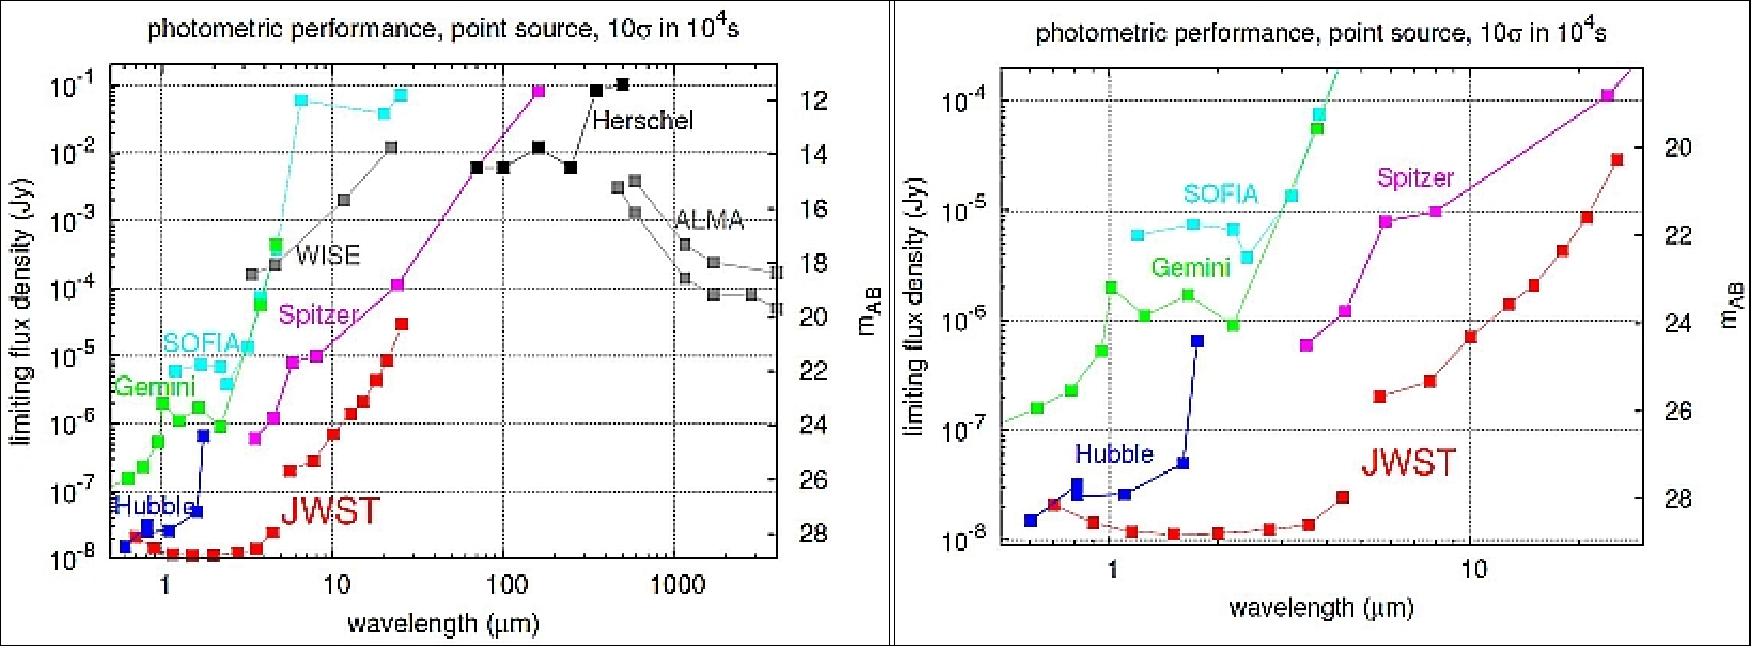 Figure 1: Photometric performance of JWST instruments as compared to those of current observatories (image credit: STScI)